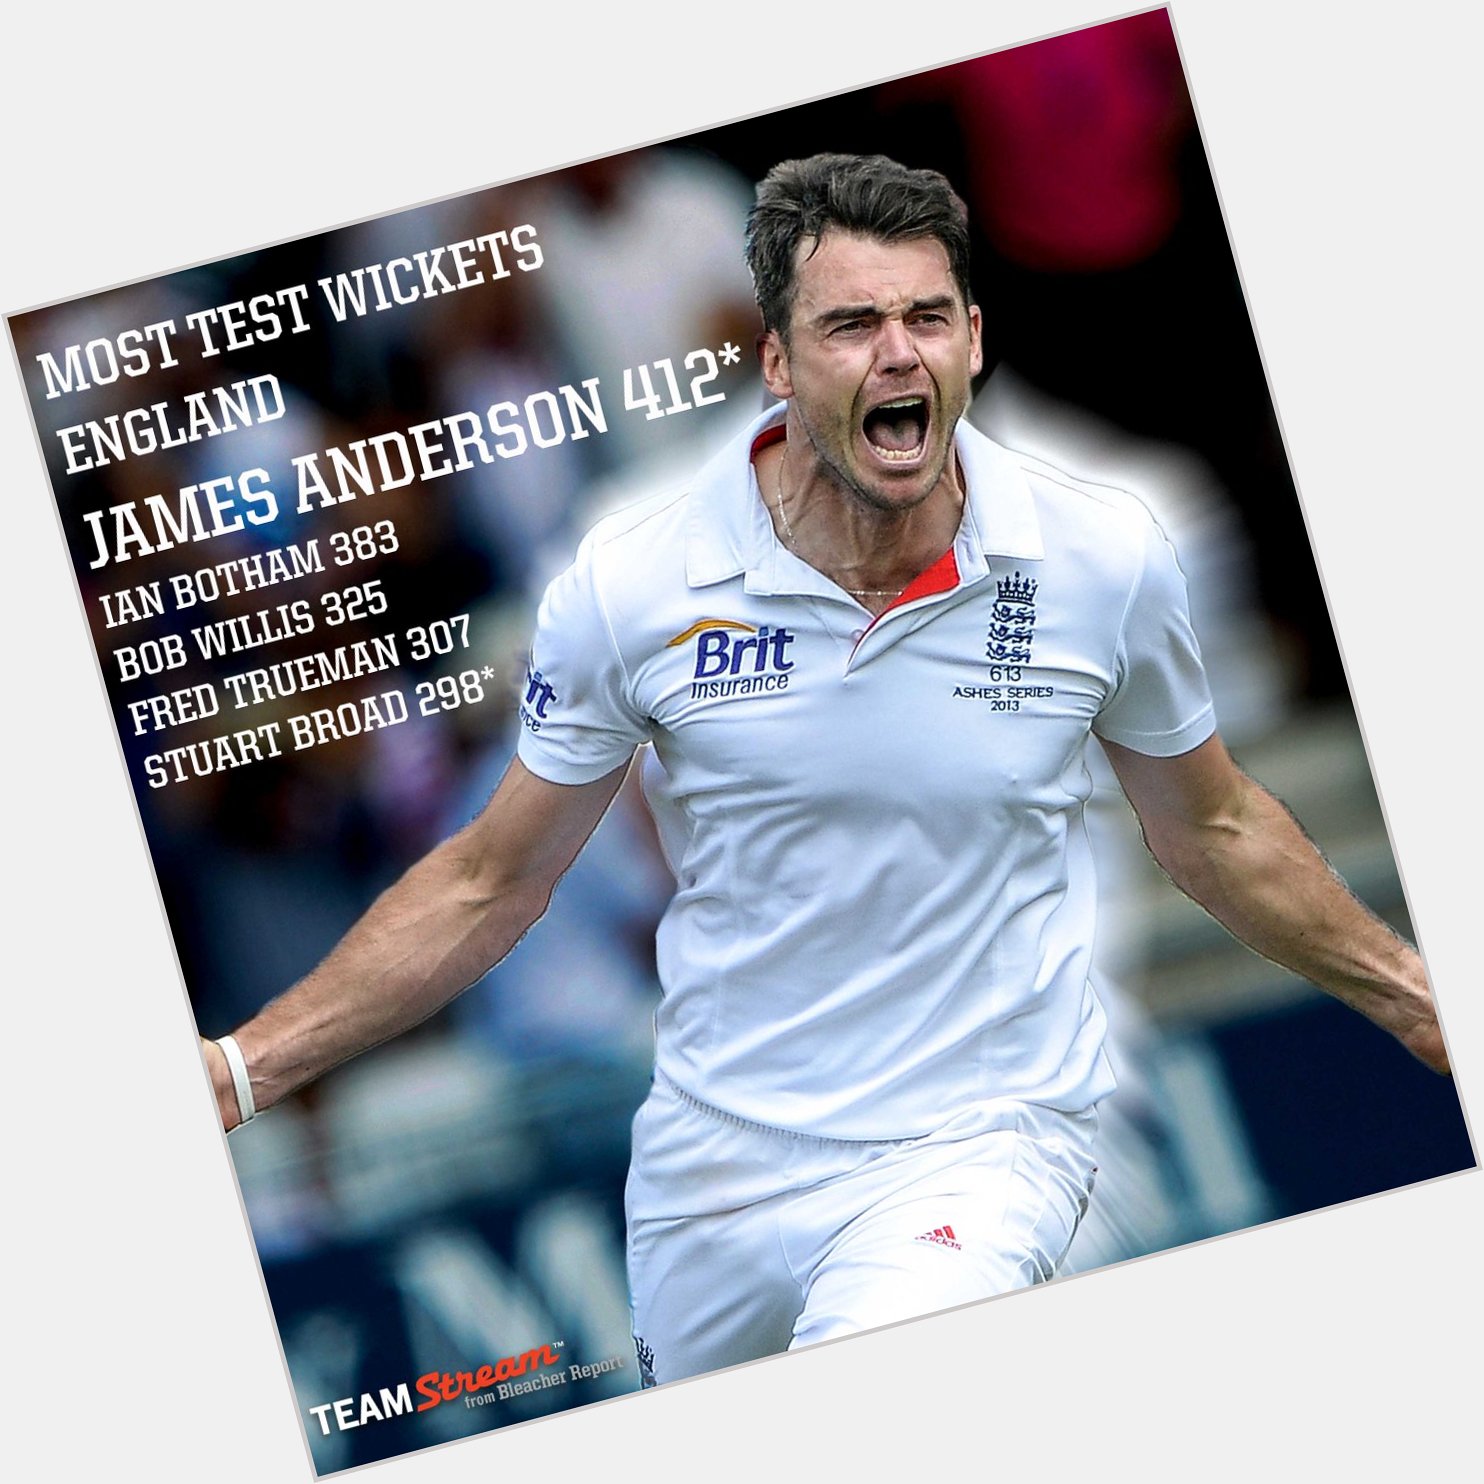 Happy 33rd birthday to England s leading wicket taker, James Anderson! 